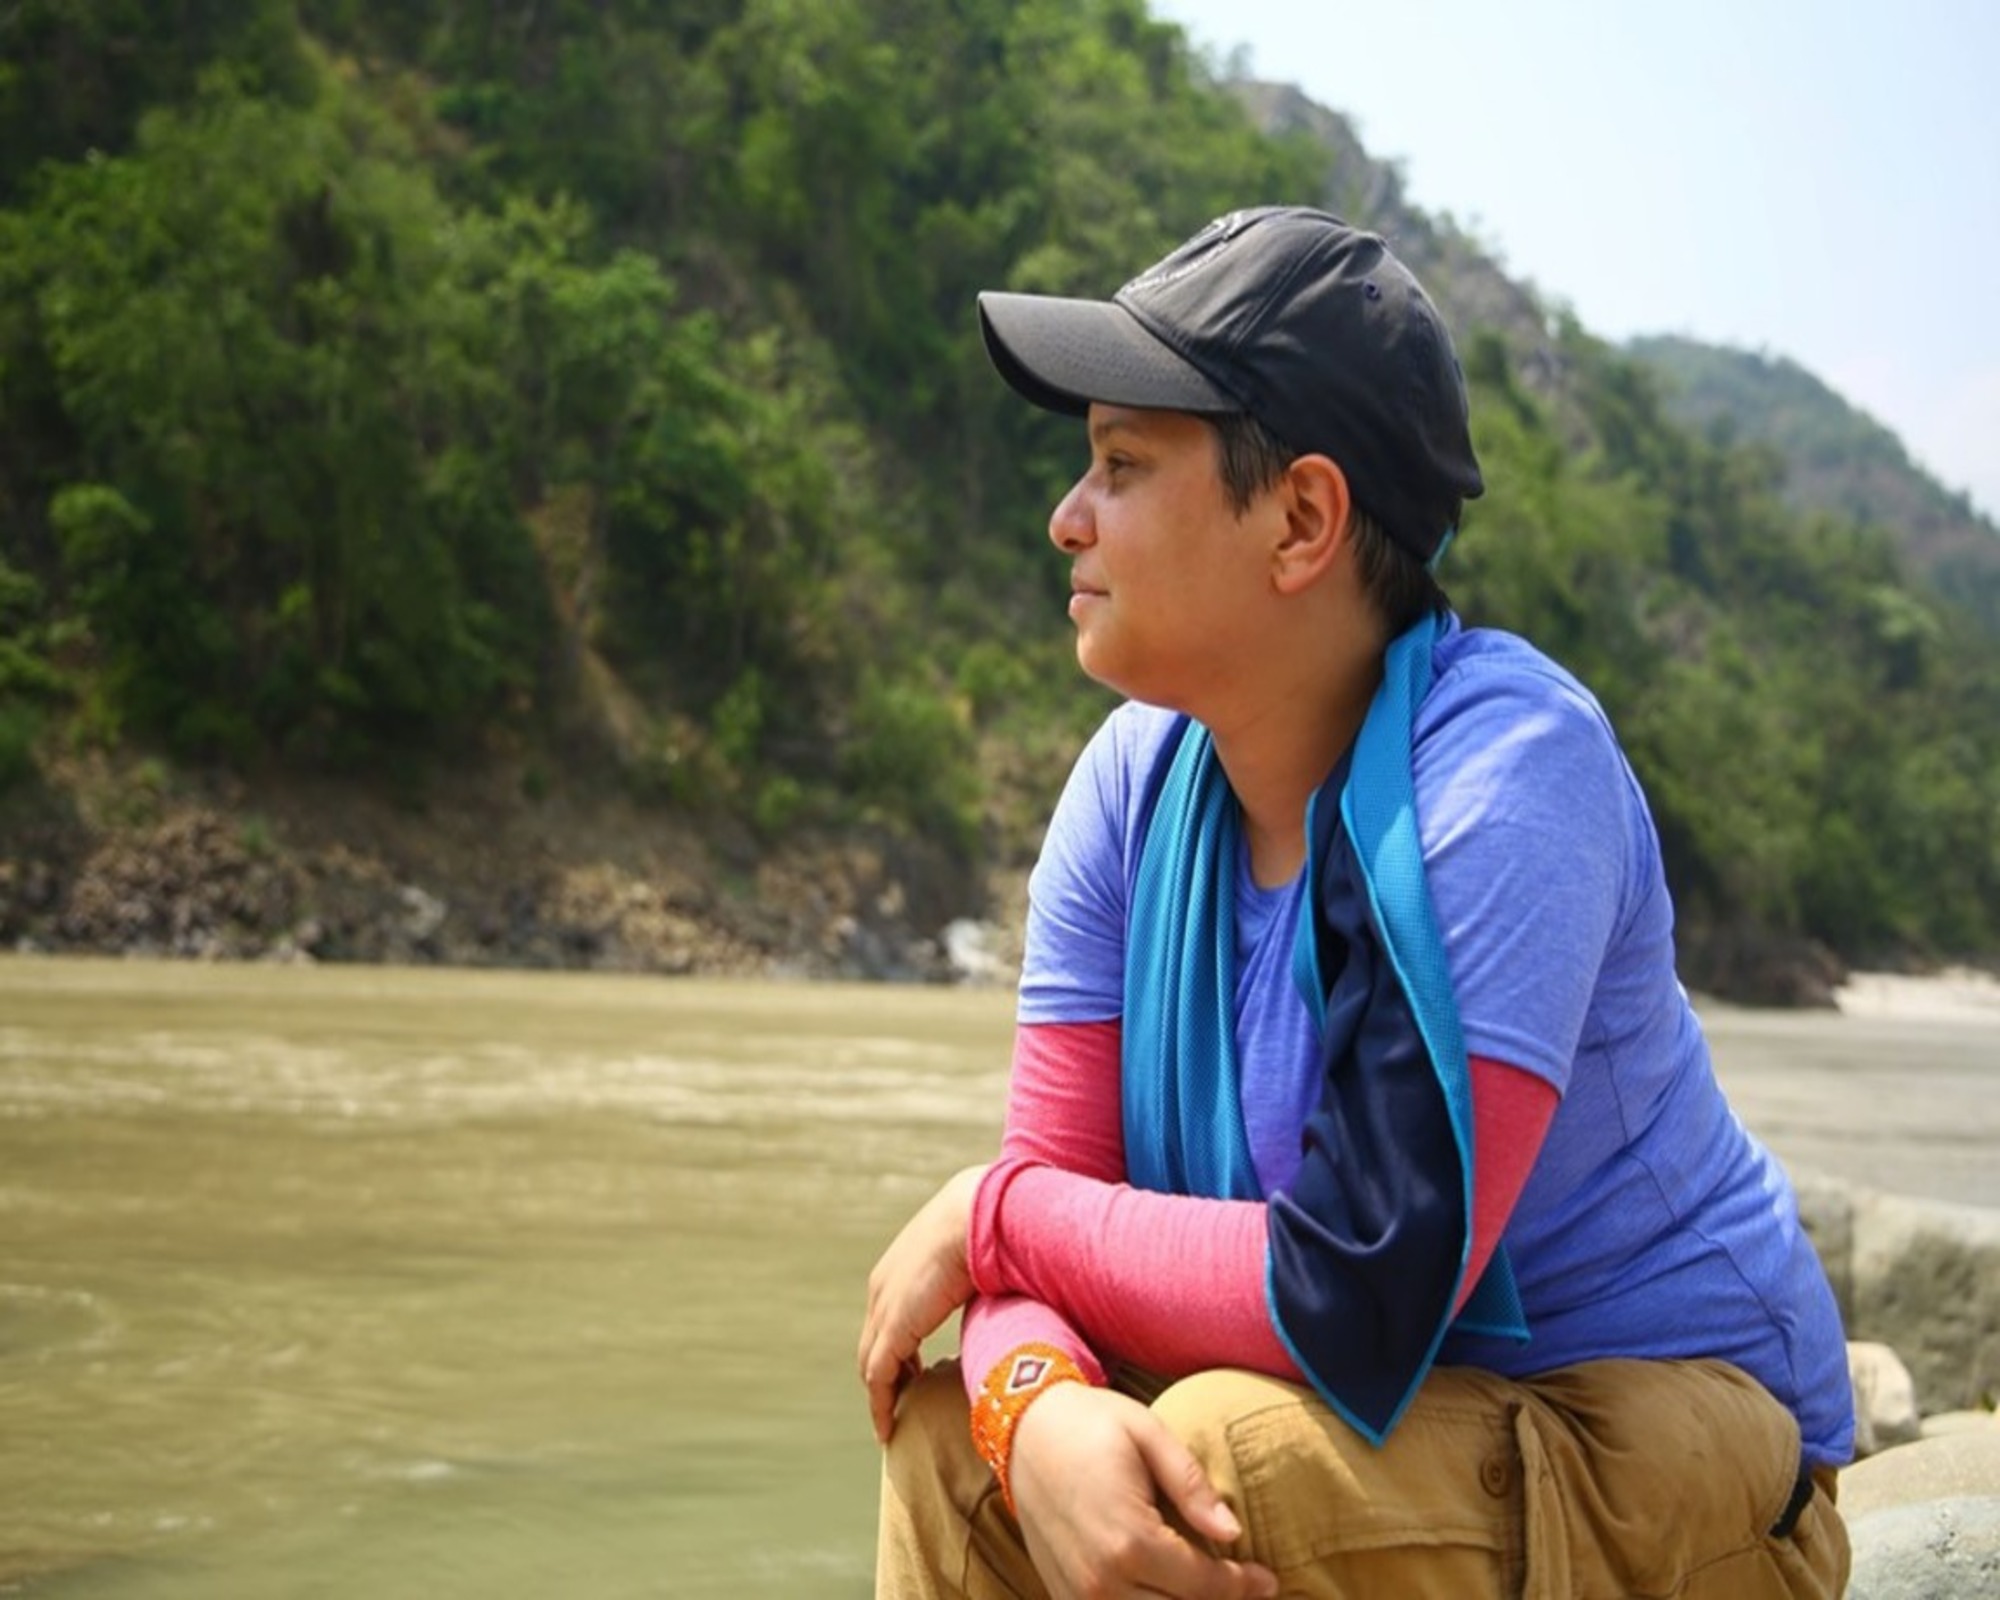 a nonbinary person wearing a baseball cap and a blue shirt looking out on a river with lush green behind them